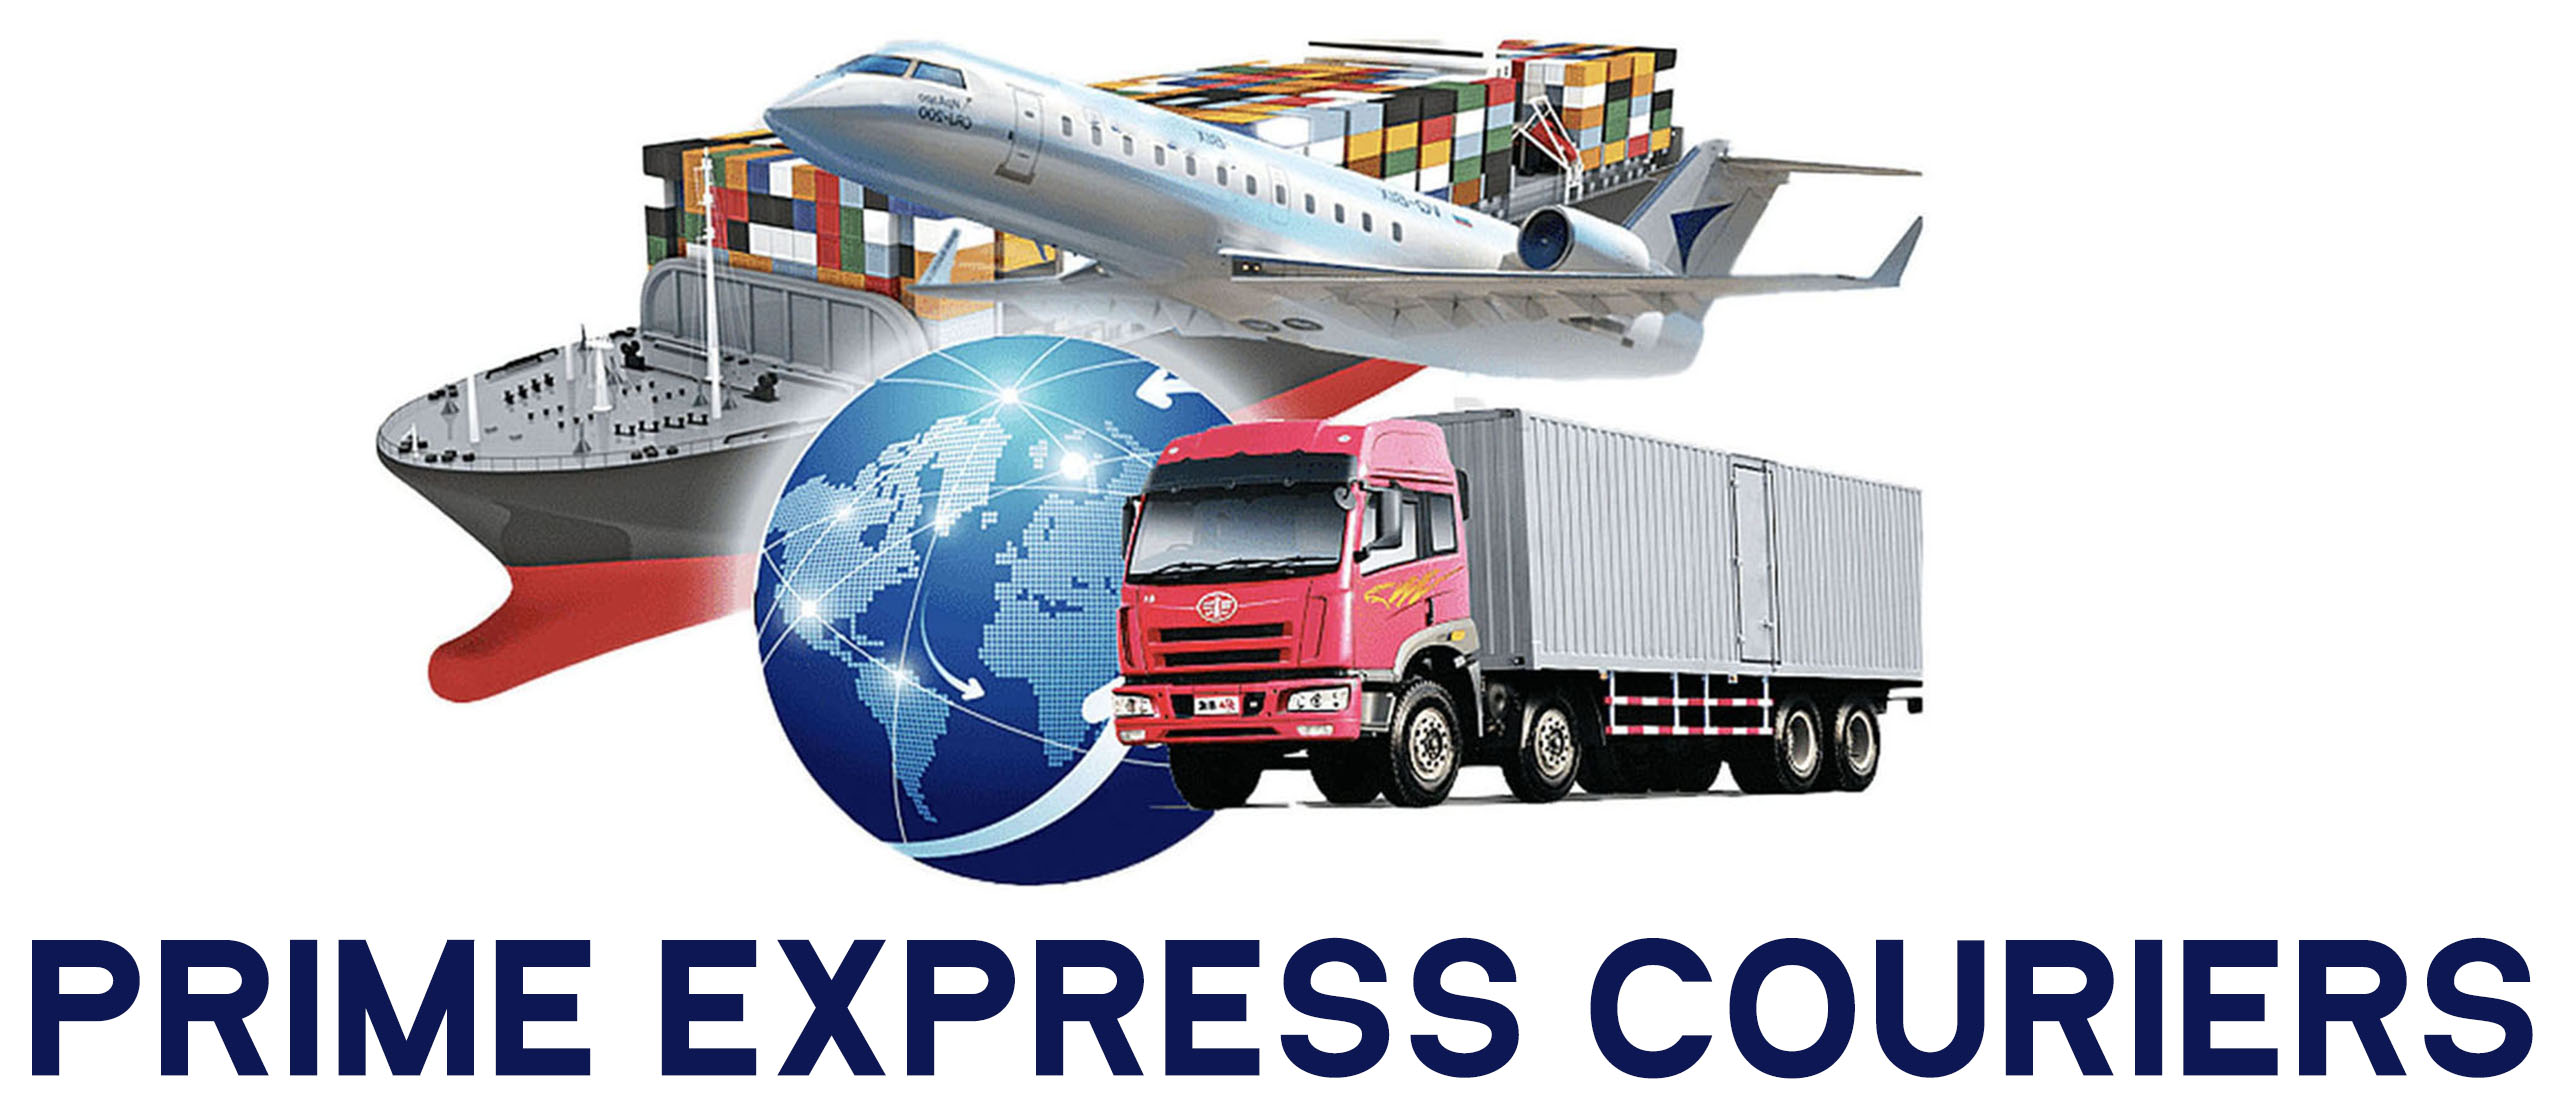 Prime Express Couriers